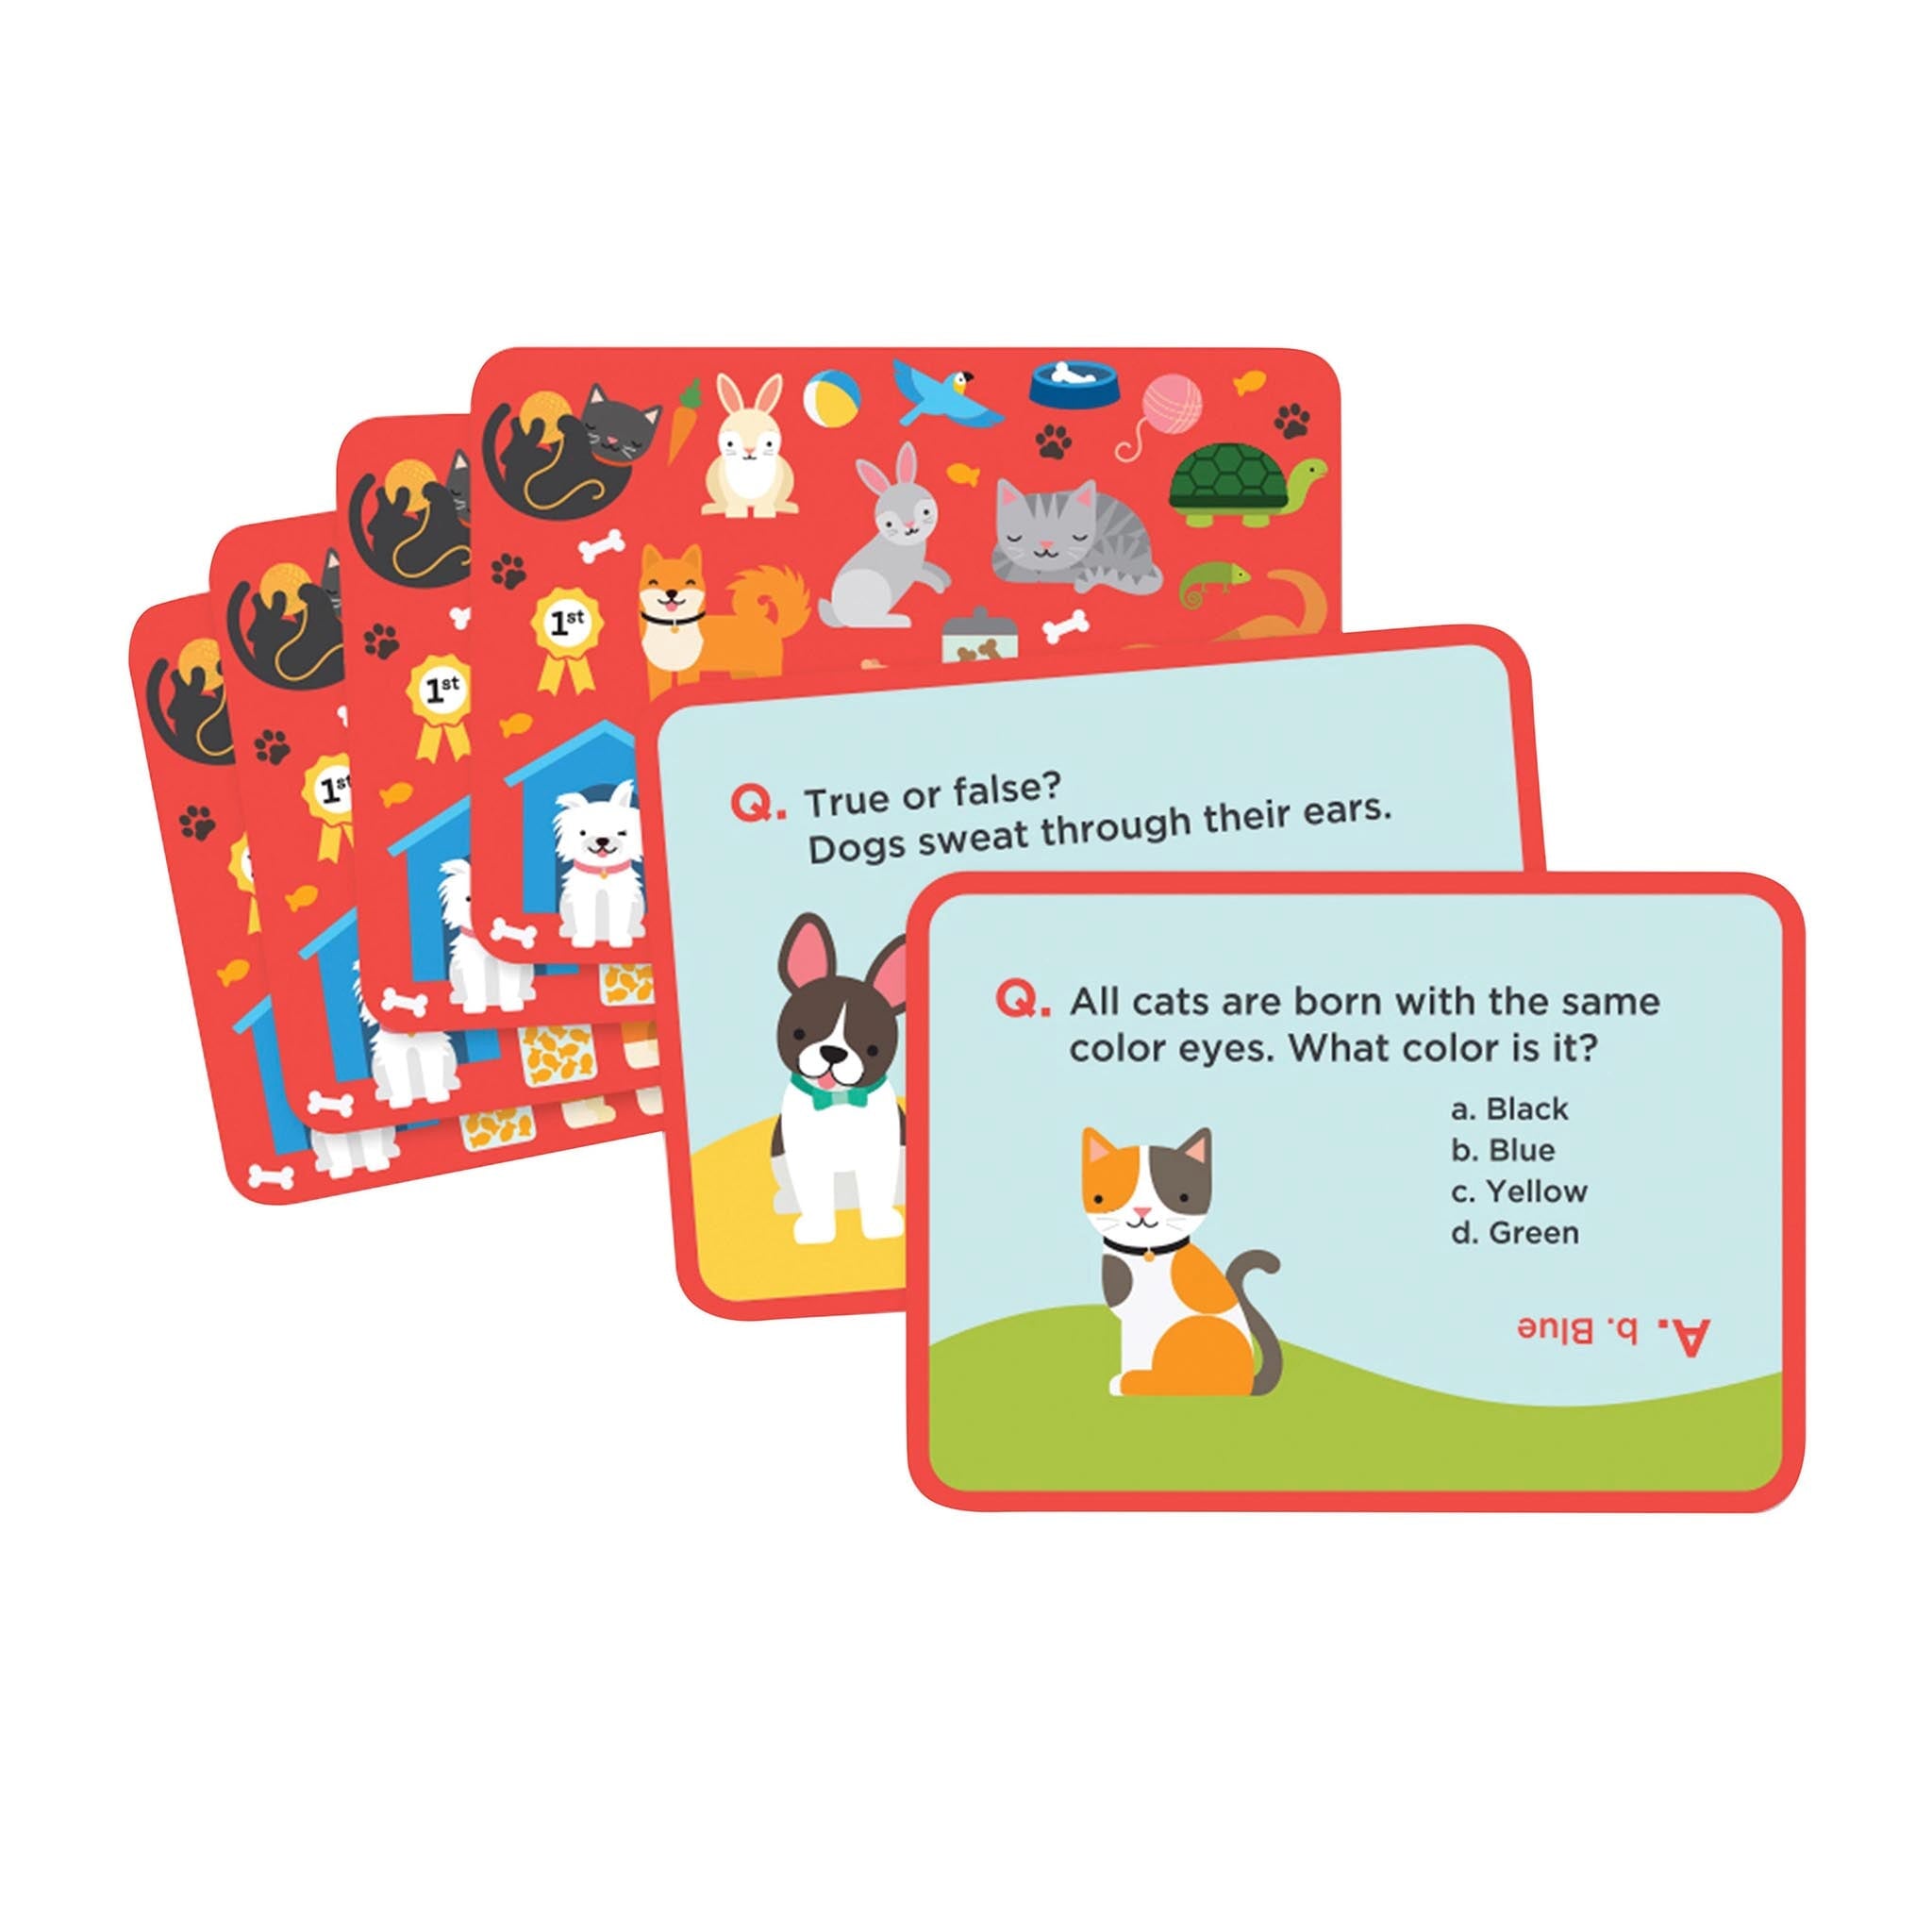 Petit Collage Trivia Cards - Pets Toys Not specified 